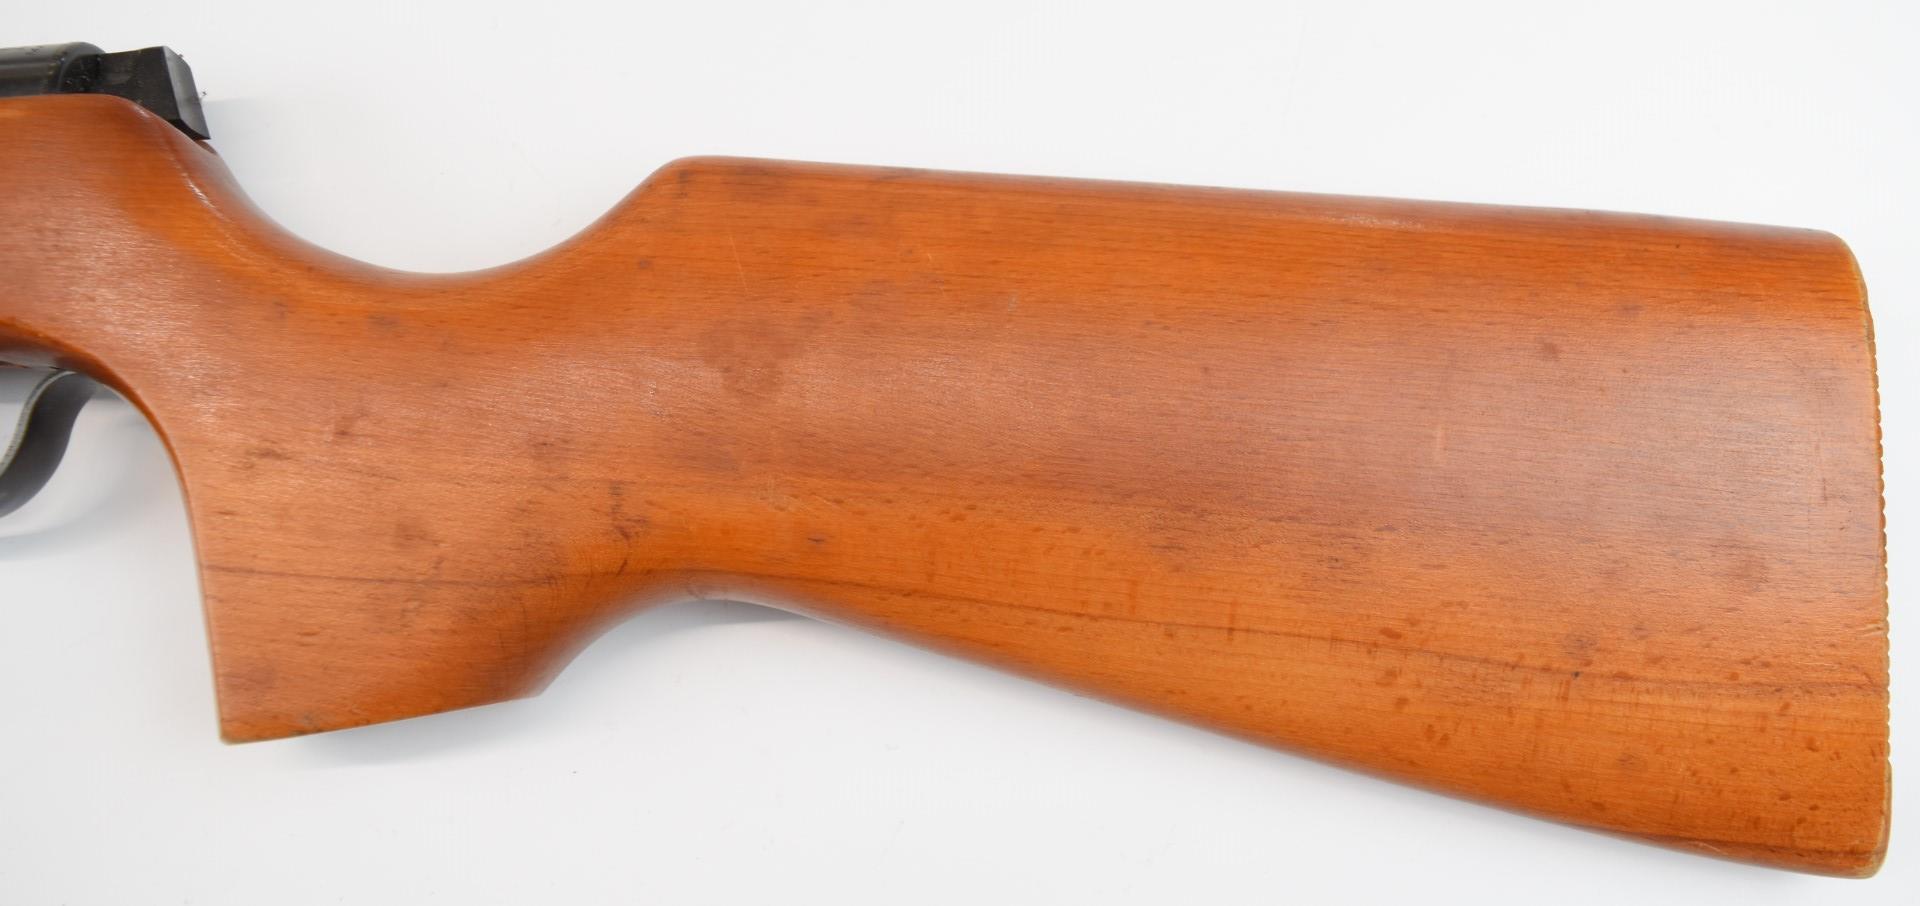 Haenel Model 310 lever-action 4.4mm calibre air rifle with semi-pistol grip, adjustable sights and - Image 13 of 19